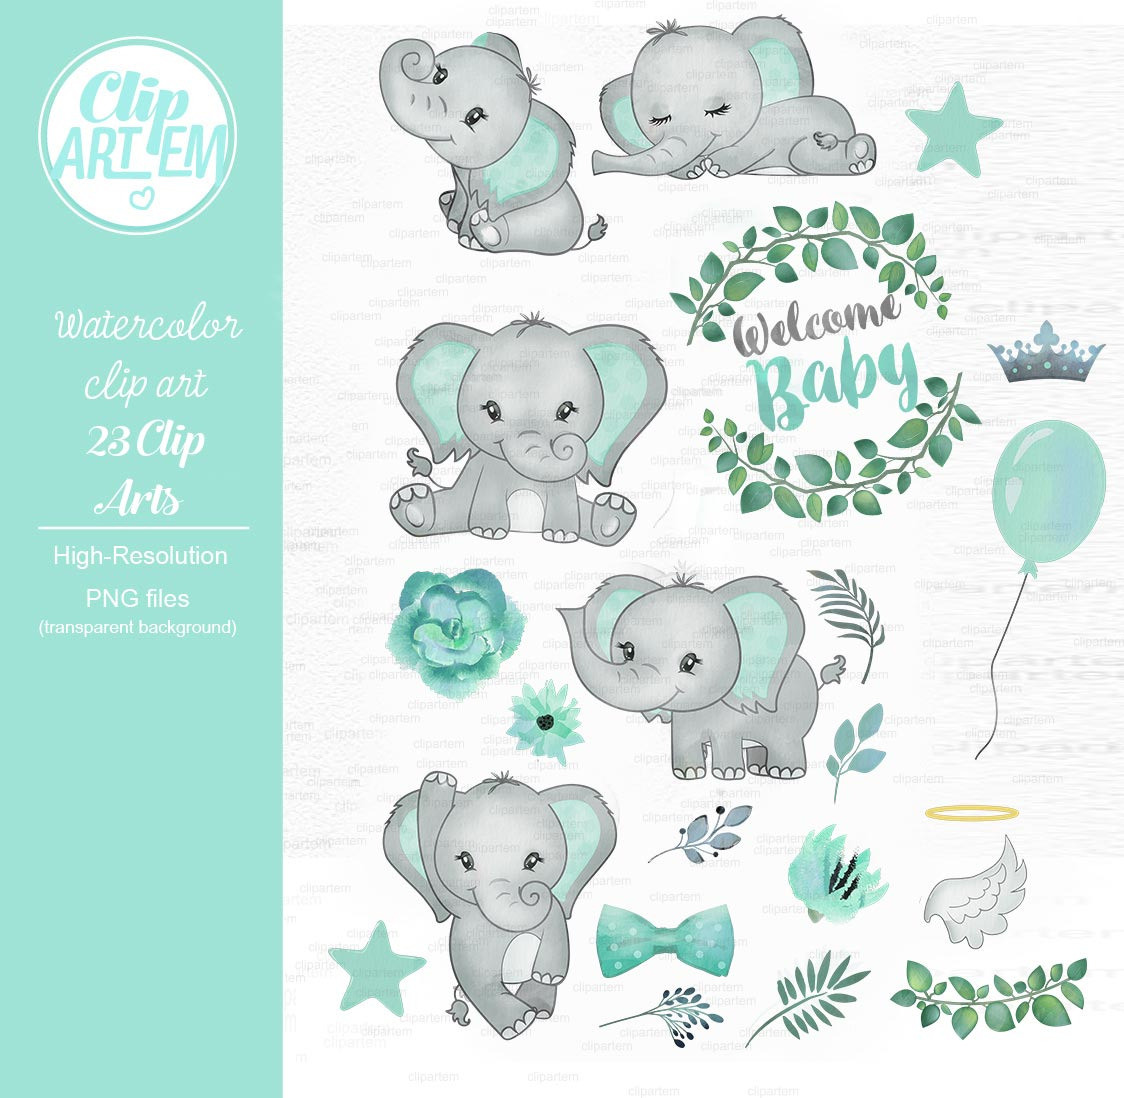 Baby elephant watercolor clipart ~ Illustrations ...